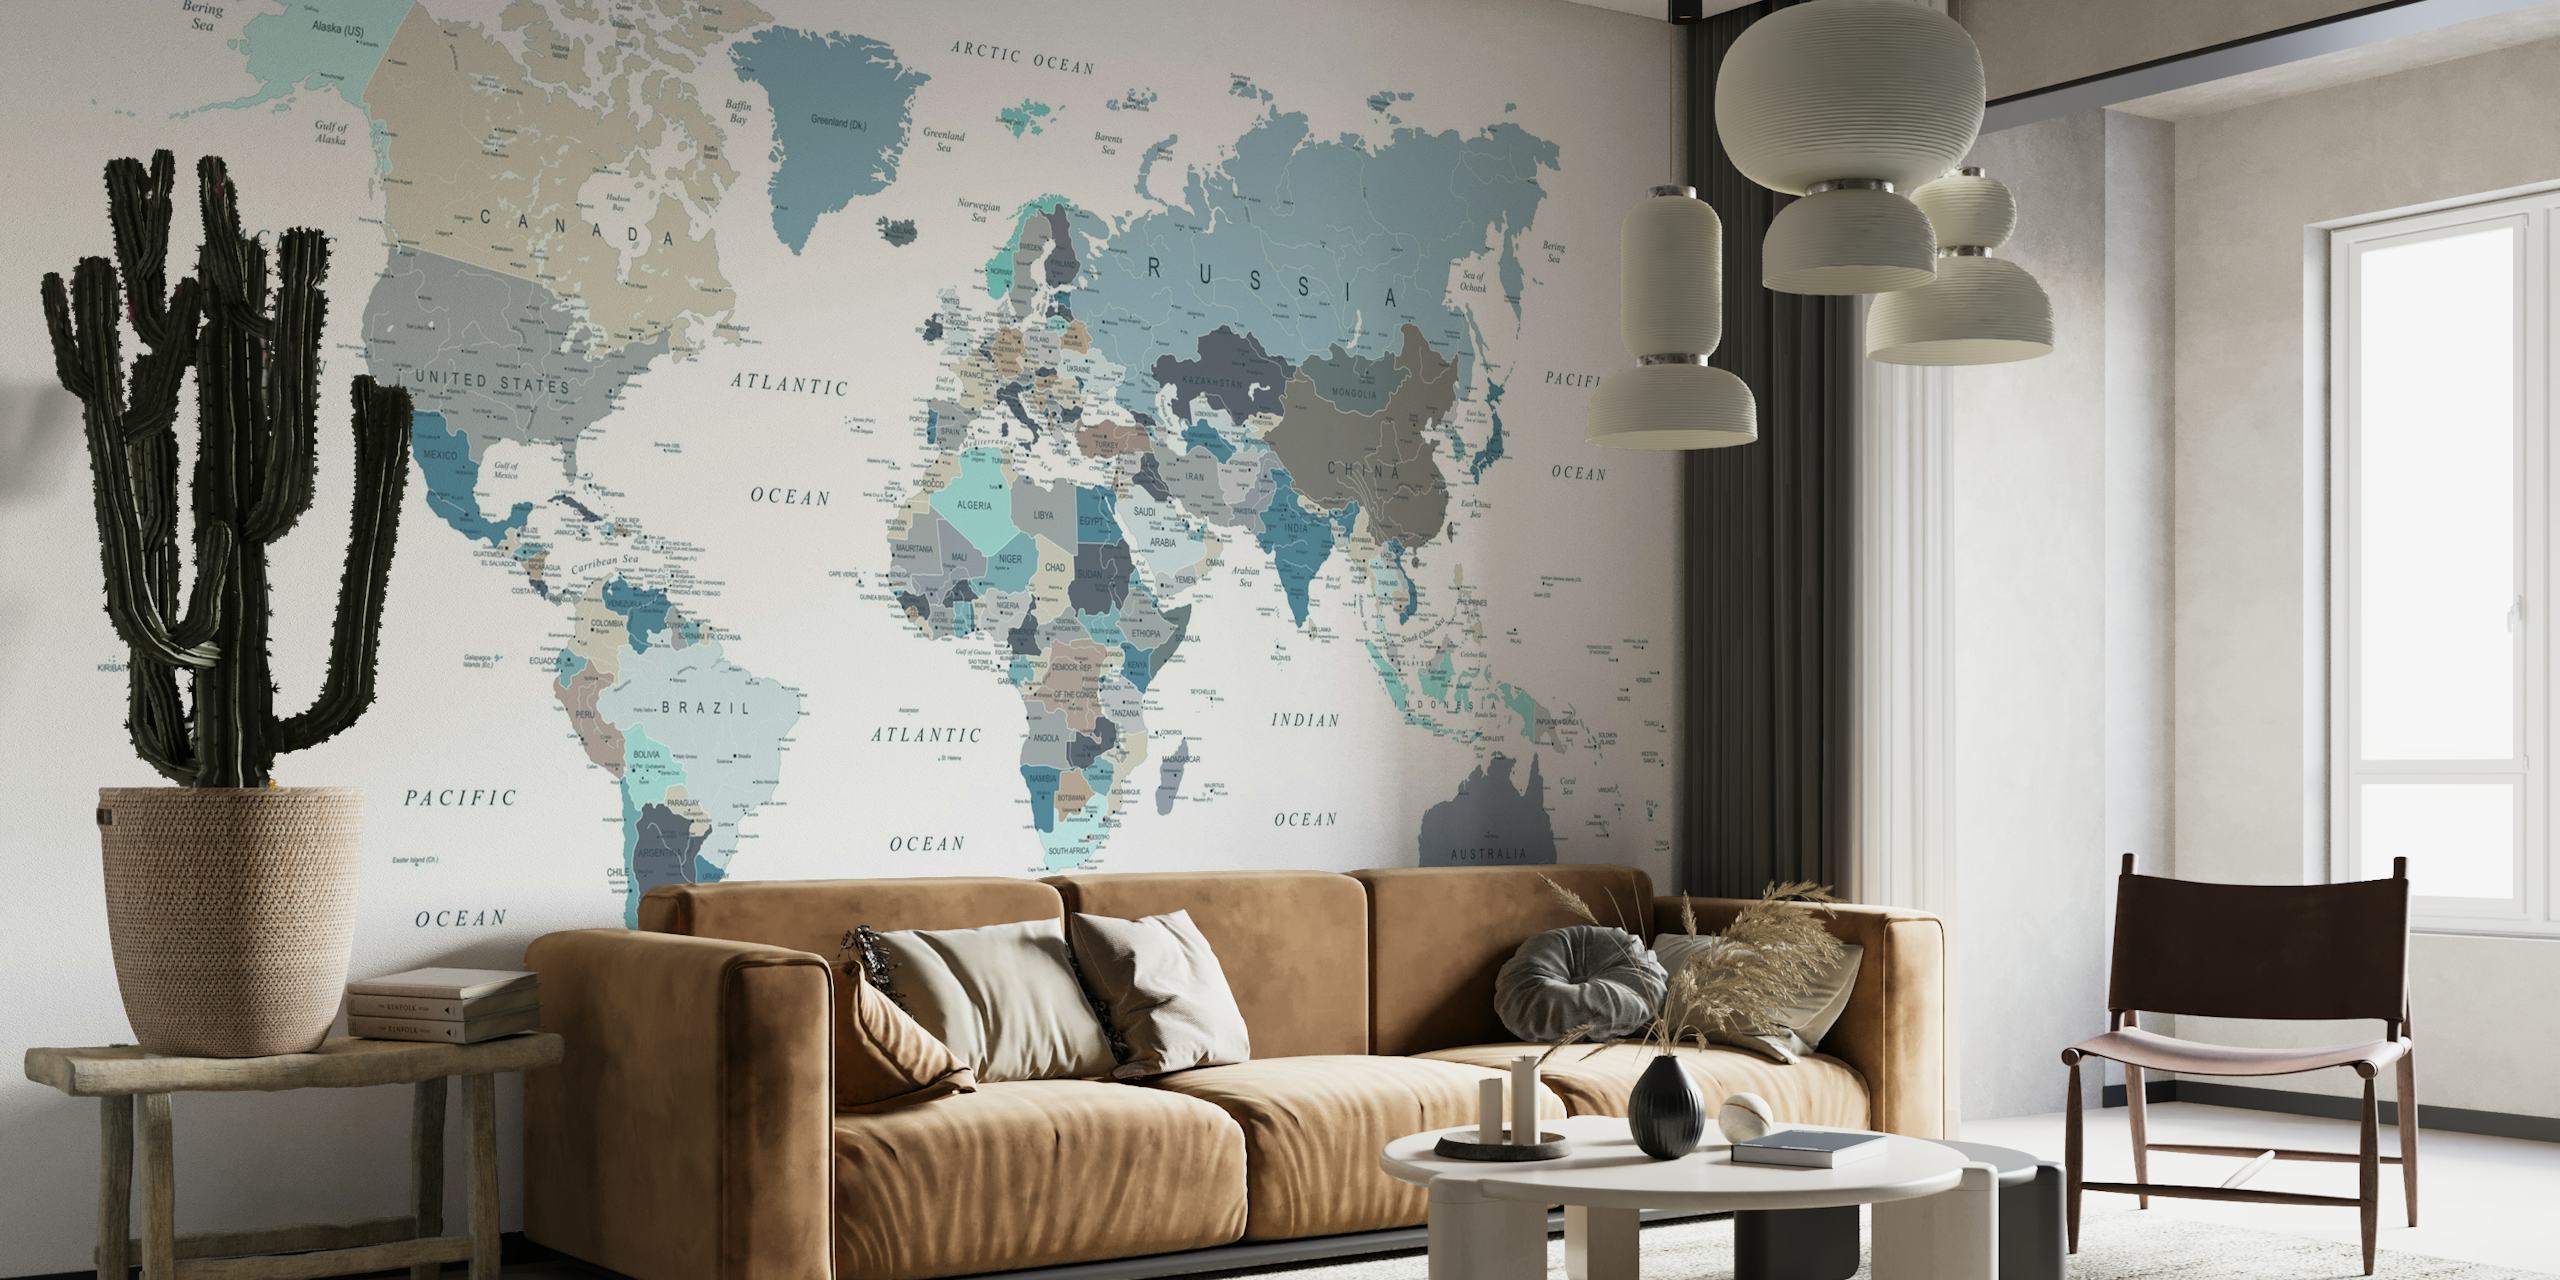 Neutral-toned world map wall mural for interior decor